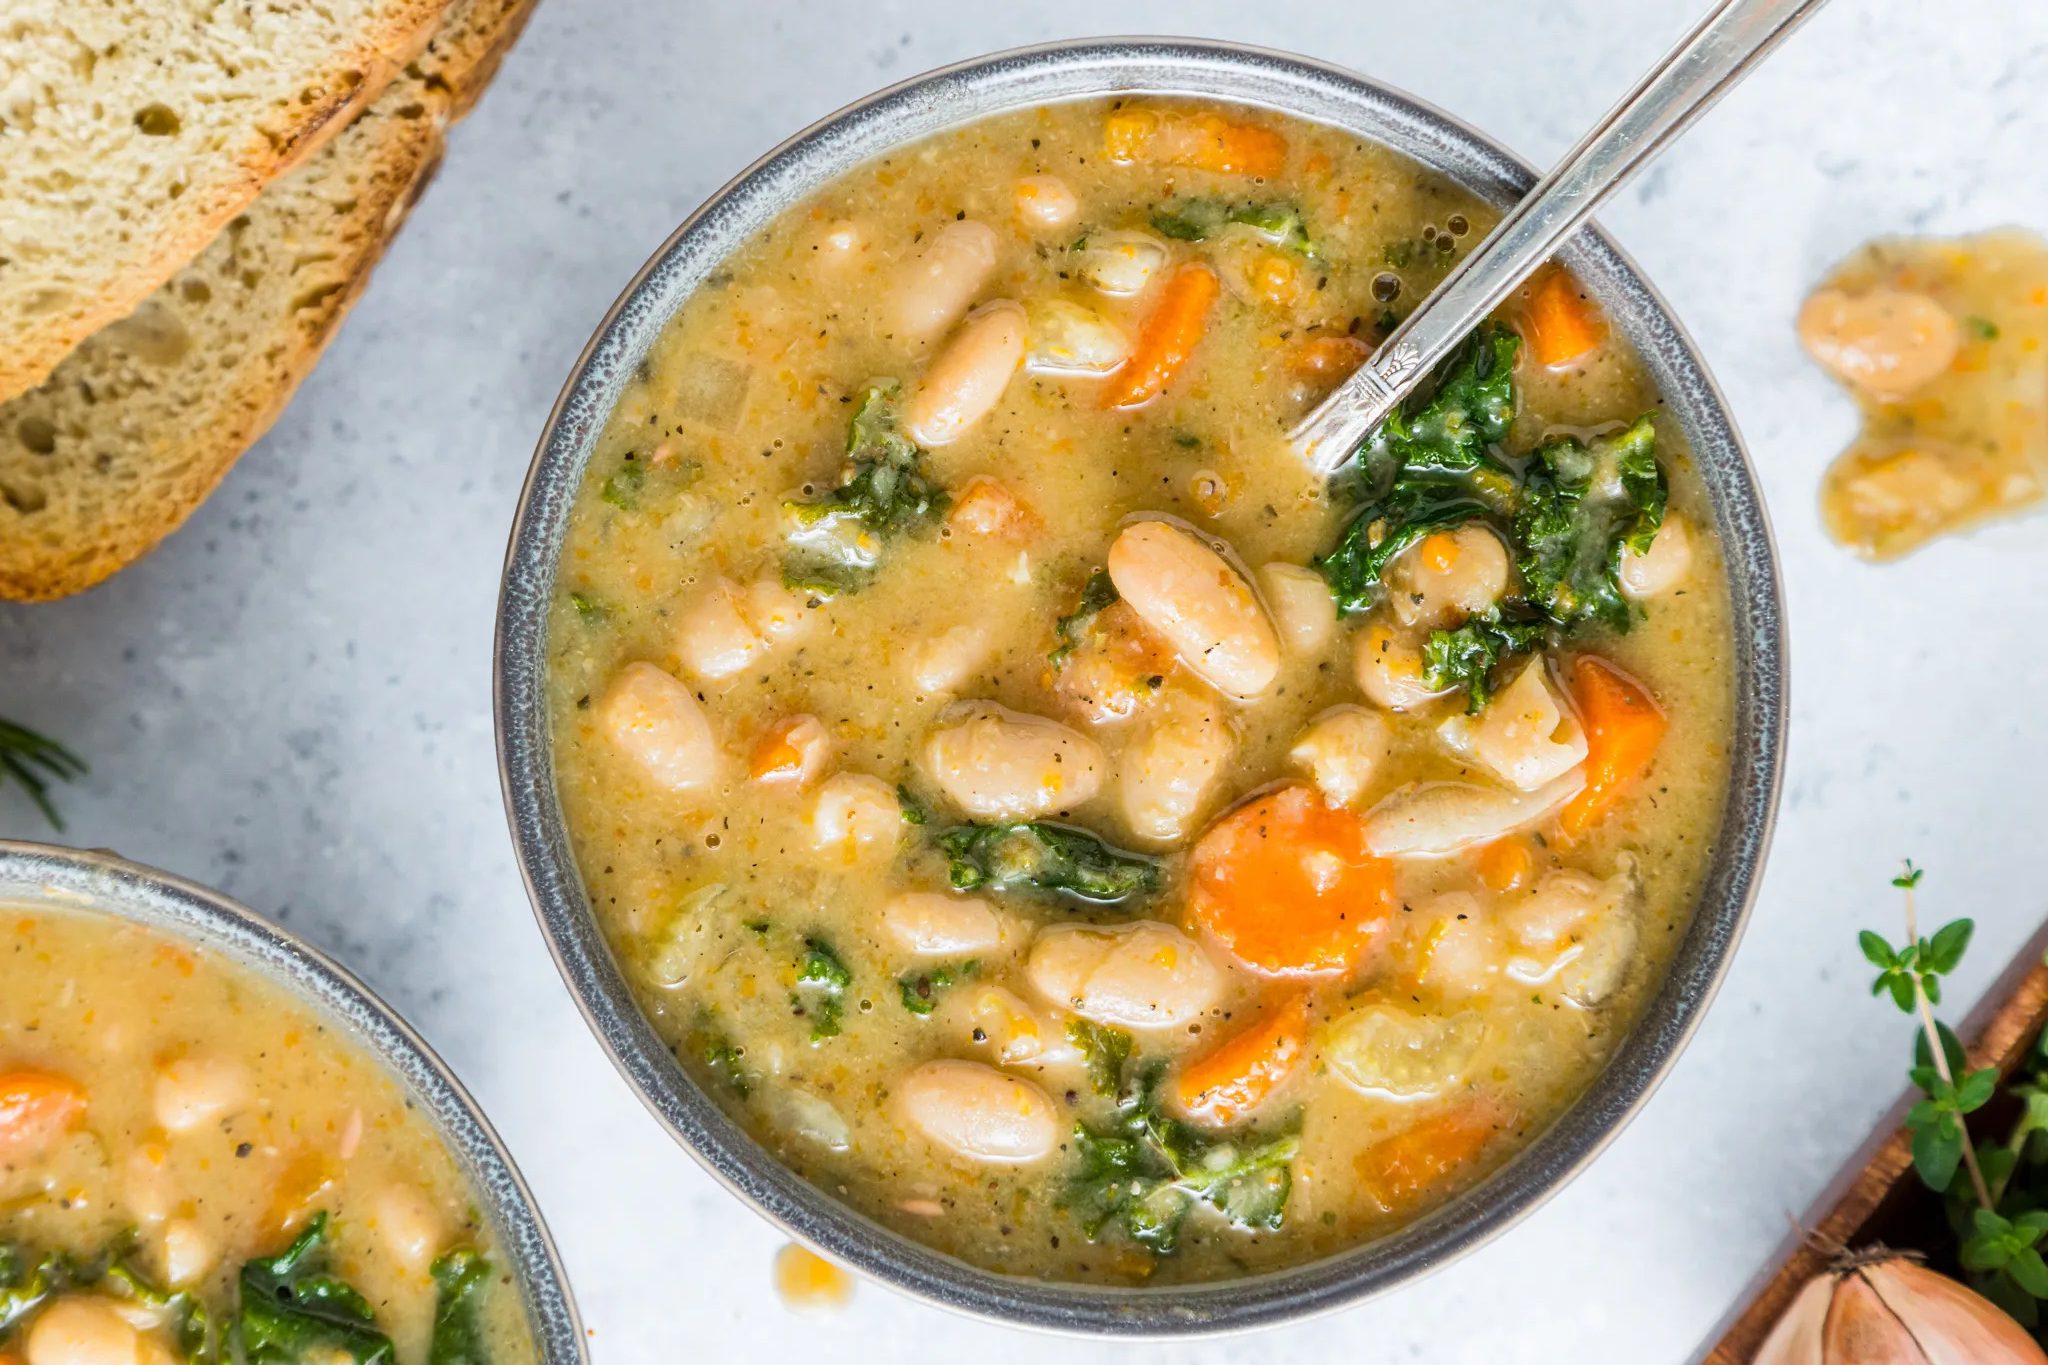 White Bean and Kale Soup Recipe Details